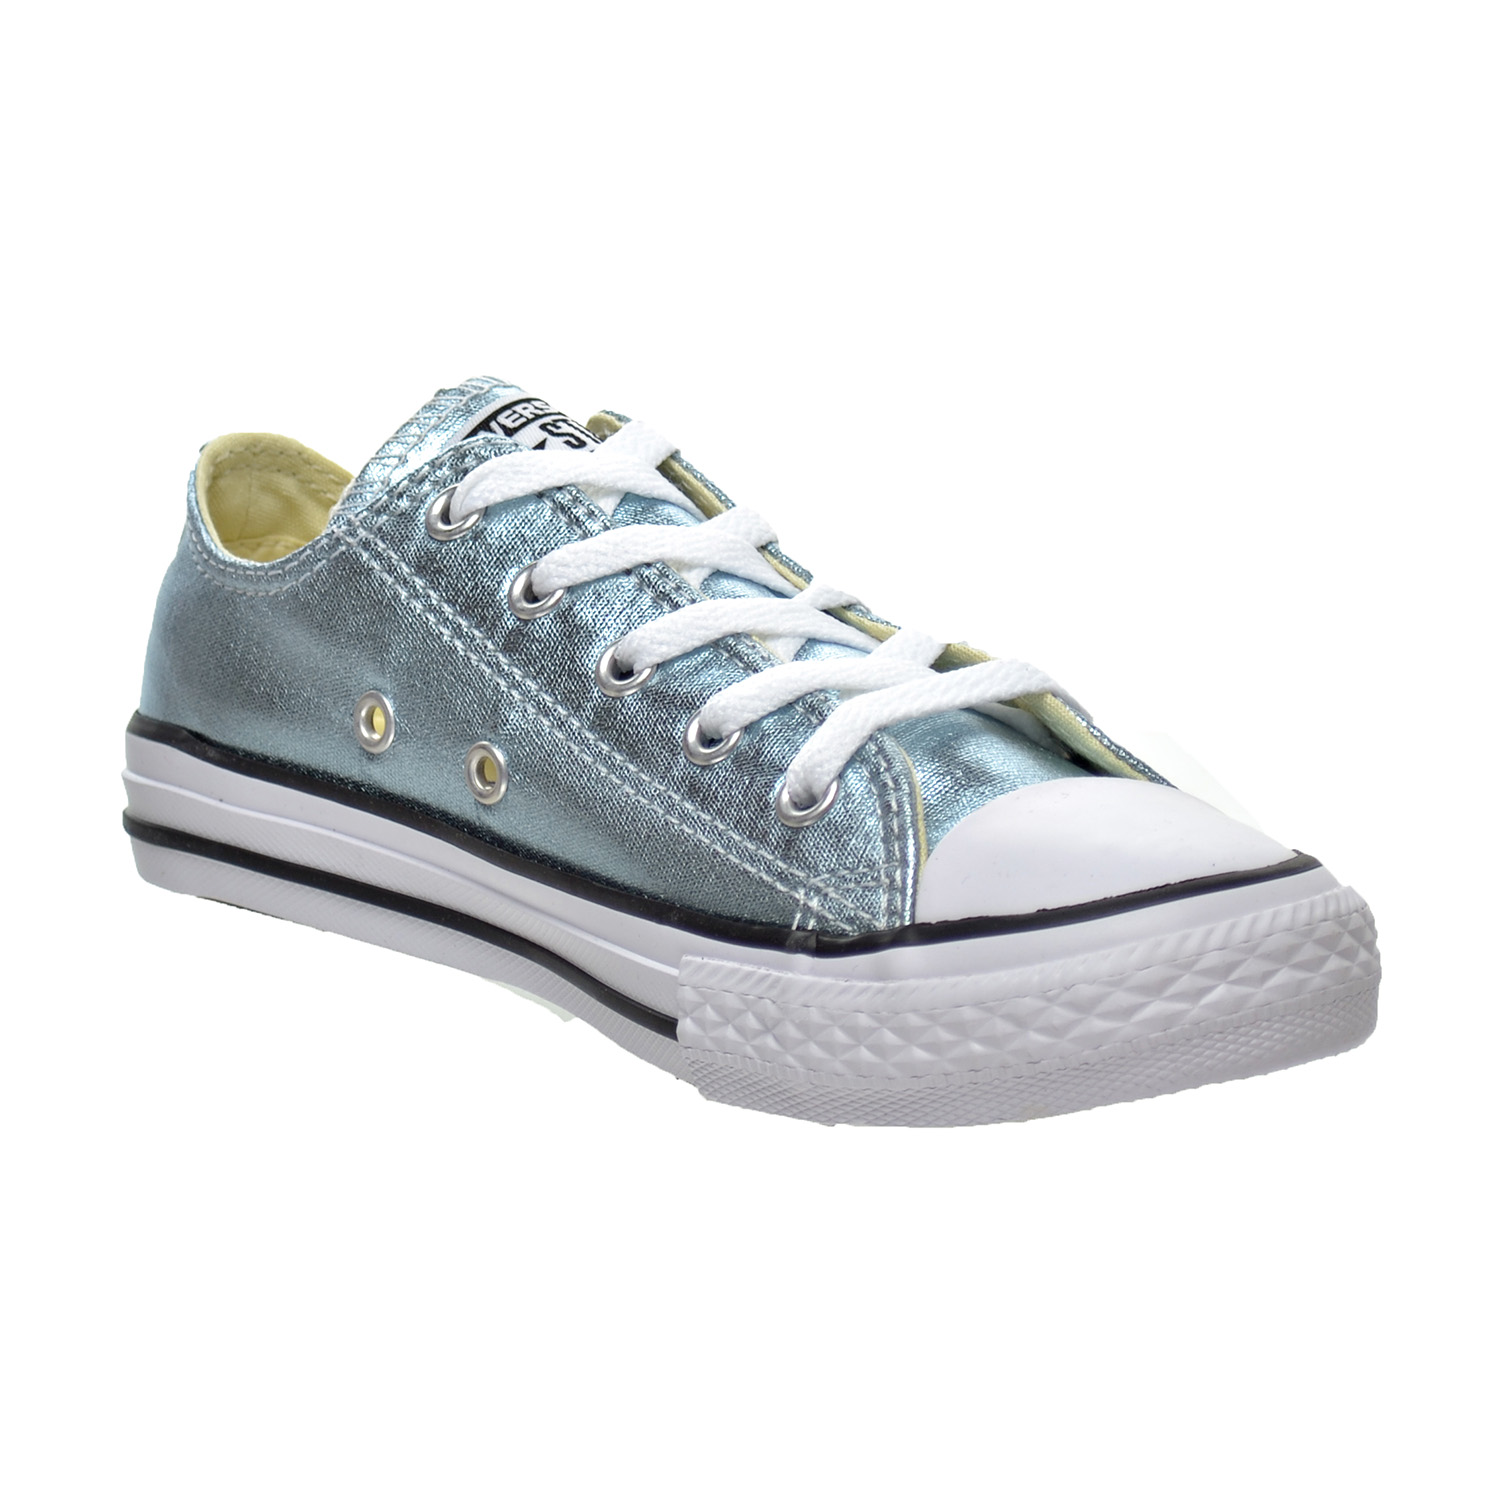 Converse Chuck Taylor All Star OX Low Top Little Kid's Shoes Metallic Glacier  354038f